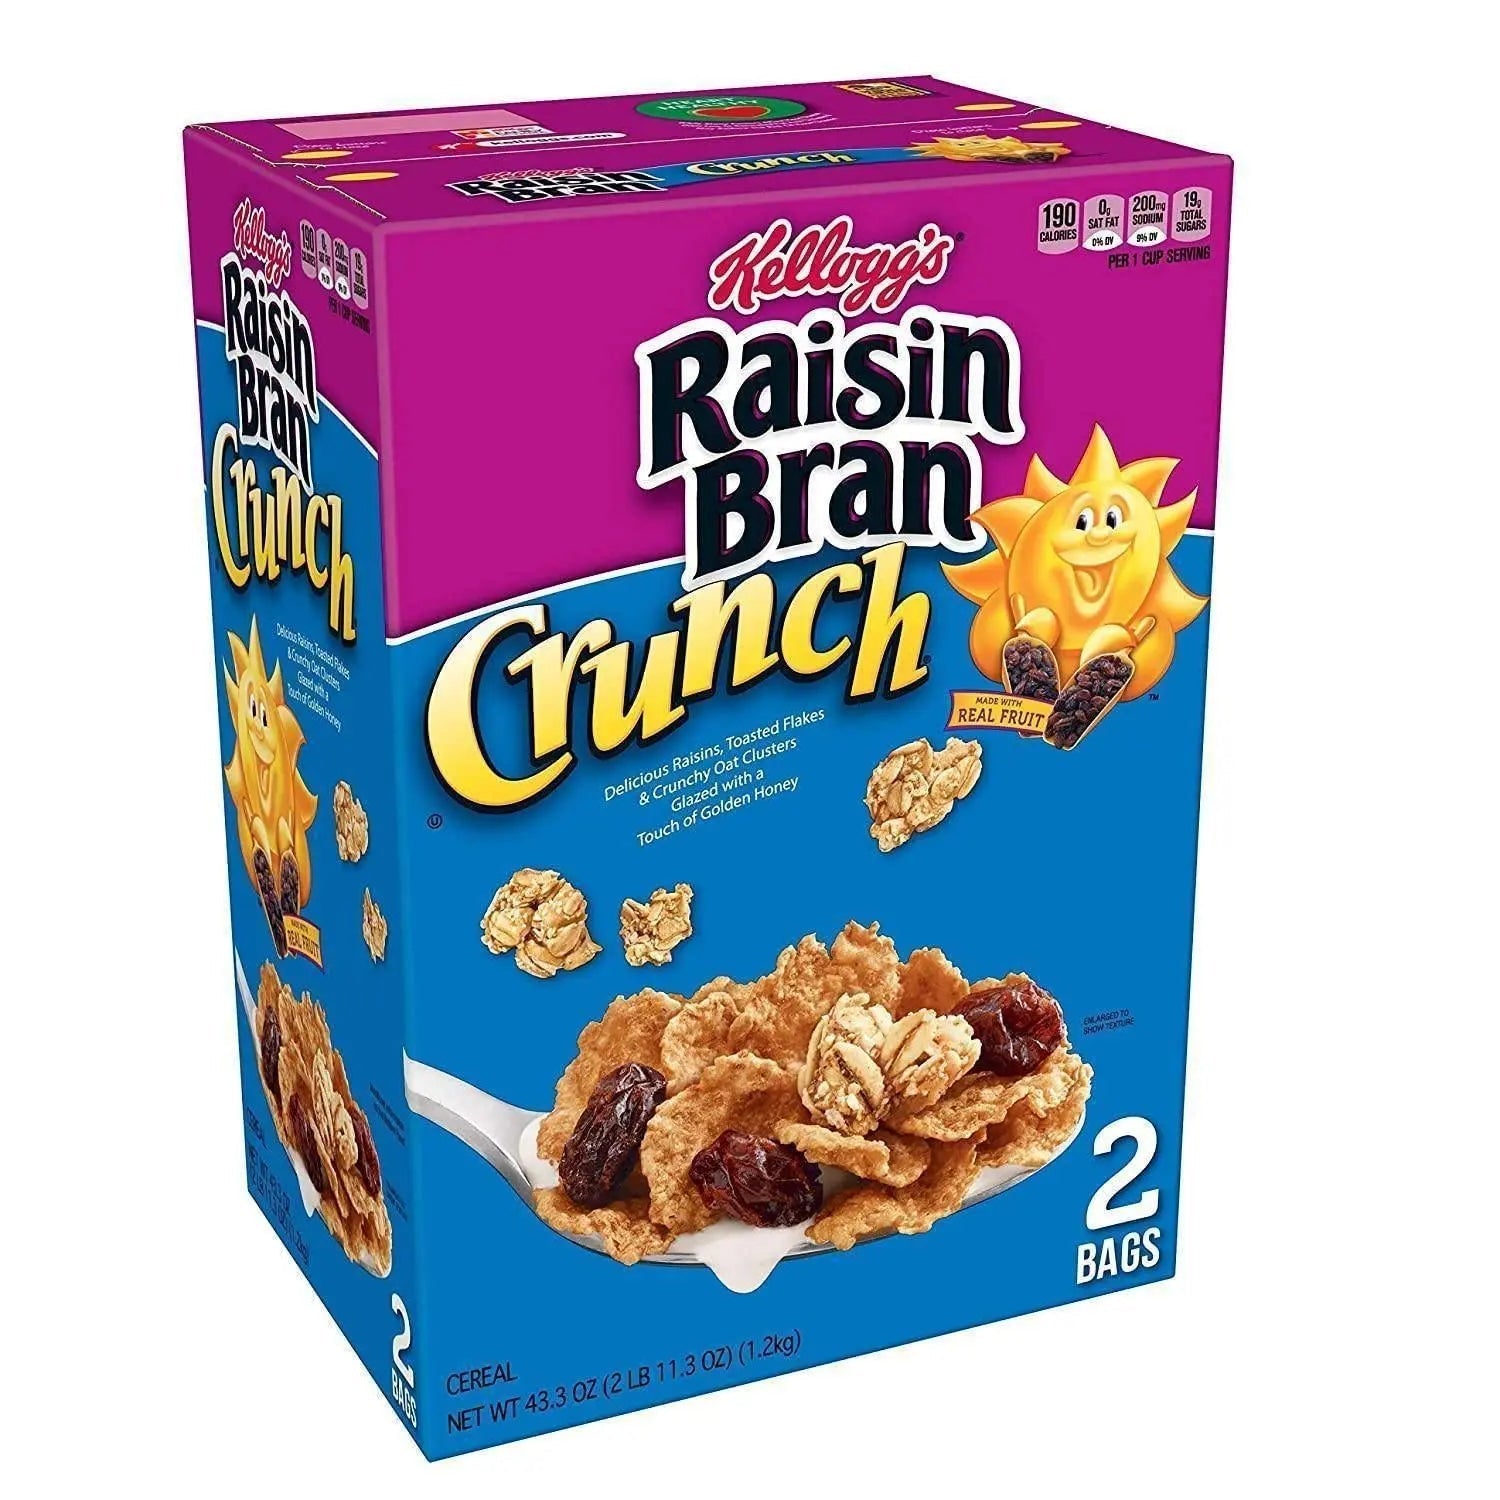 Wholesale prices with free shipping all over United States Kellogg's Original Raisin Bran Crunch Breakfast Cereal - Steven Deals